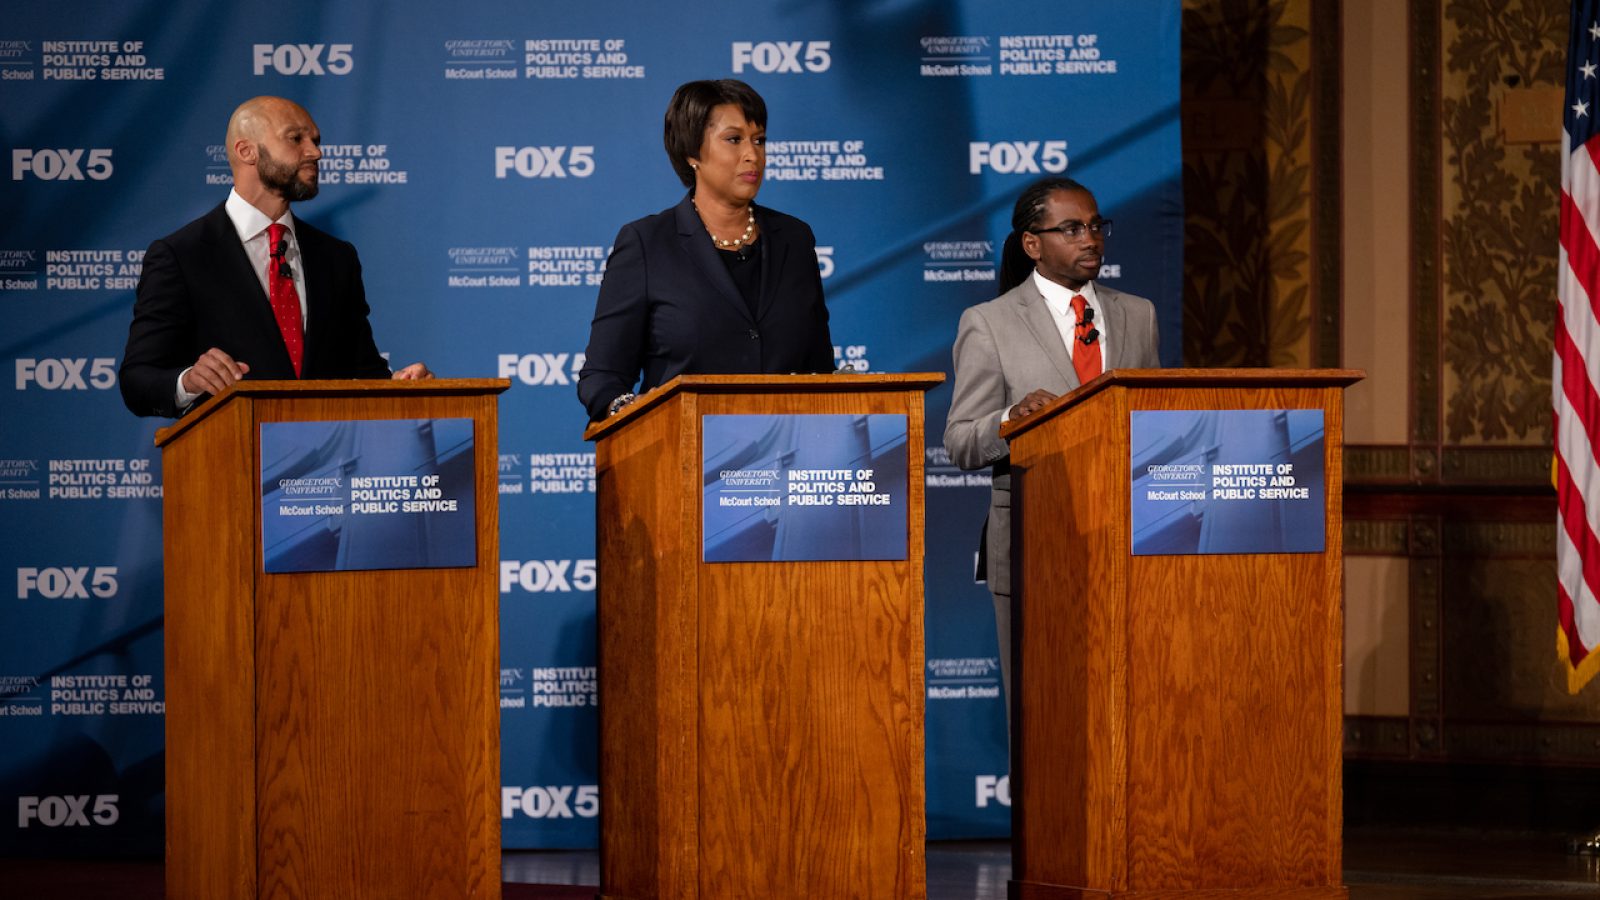 An image of three of the Democratic candidates running for mayor of DC behind three podiums in Gaston Hall during a live televised debate.